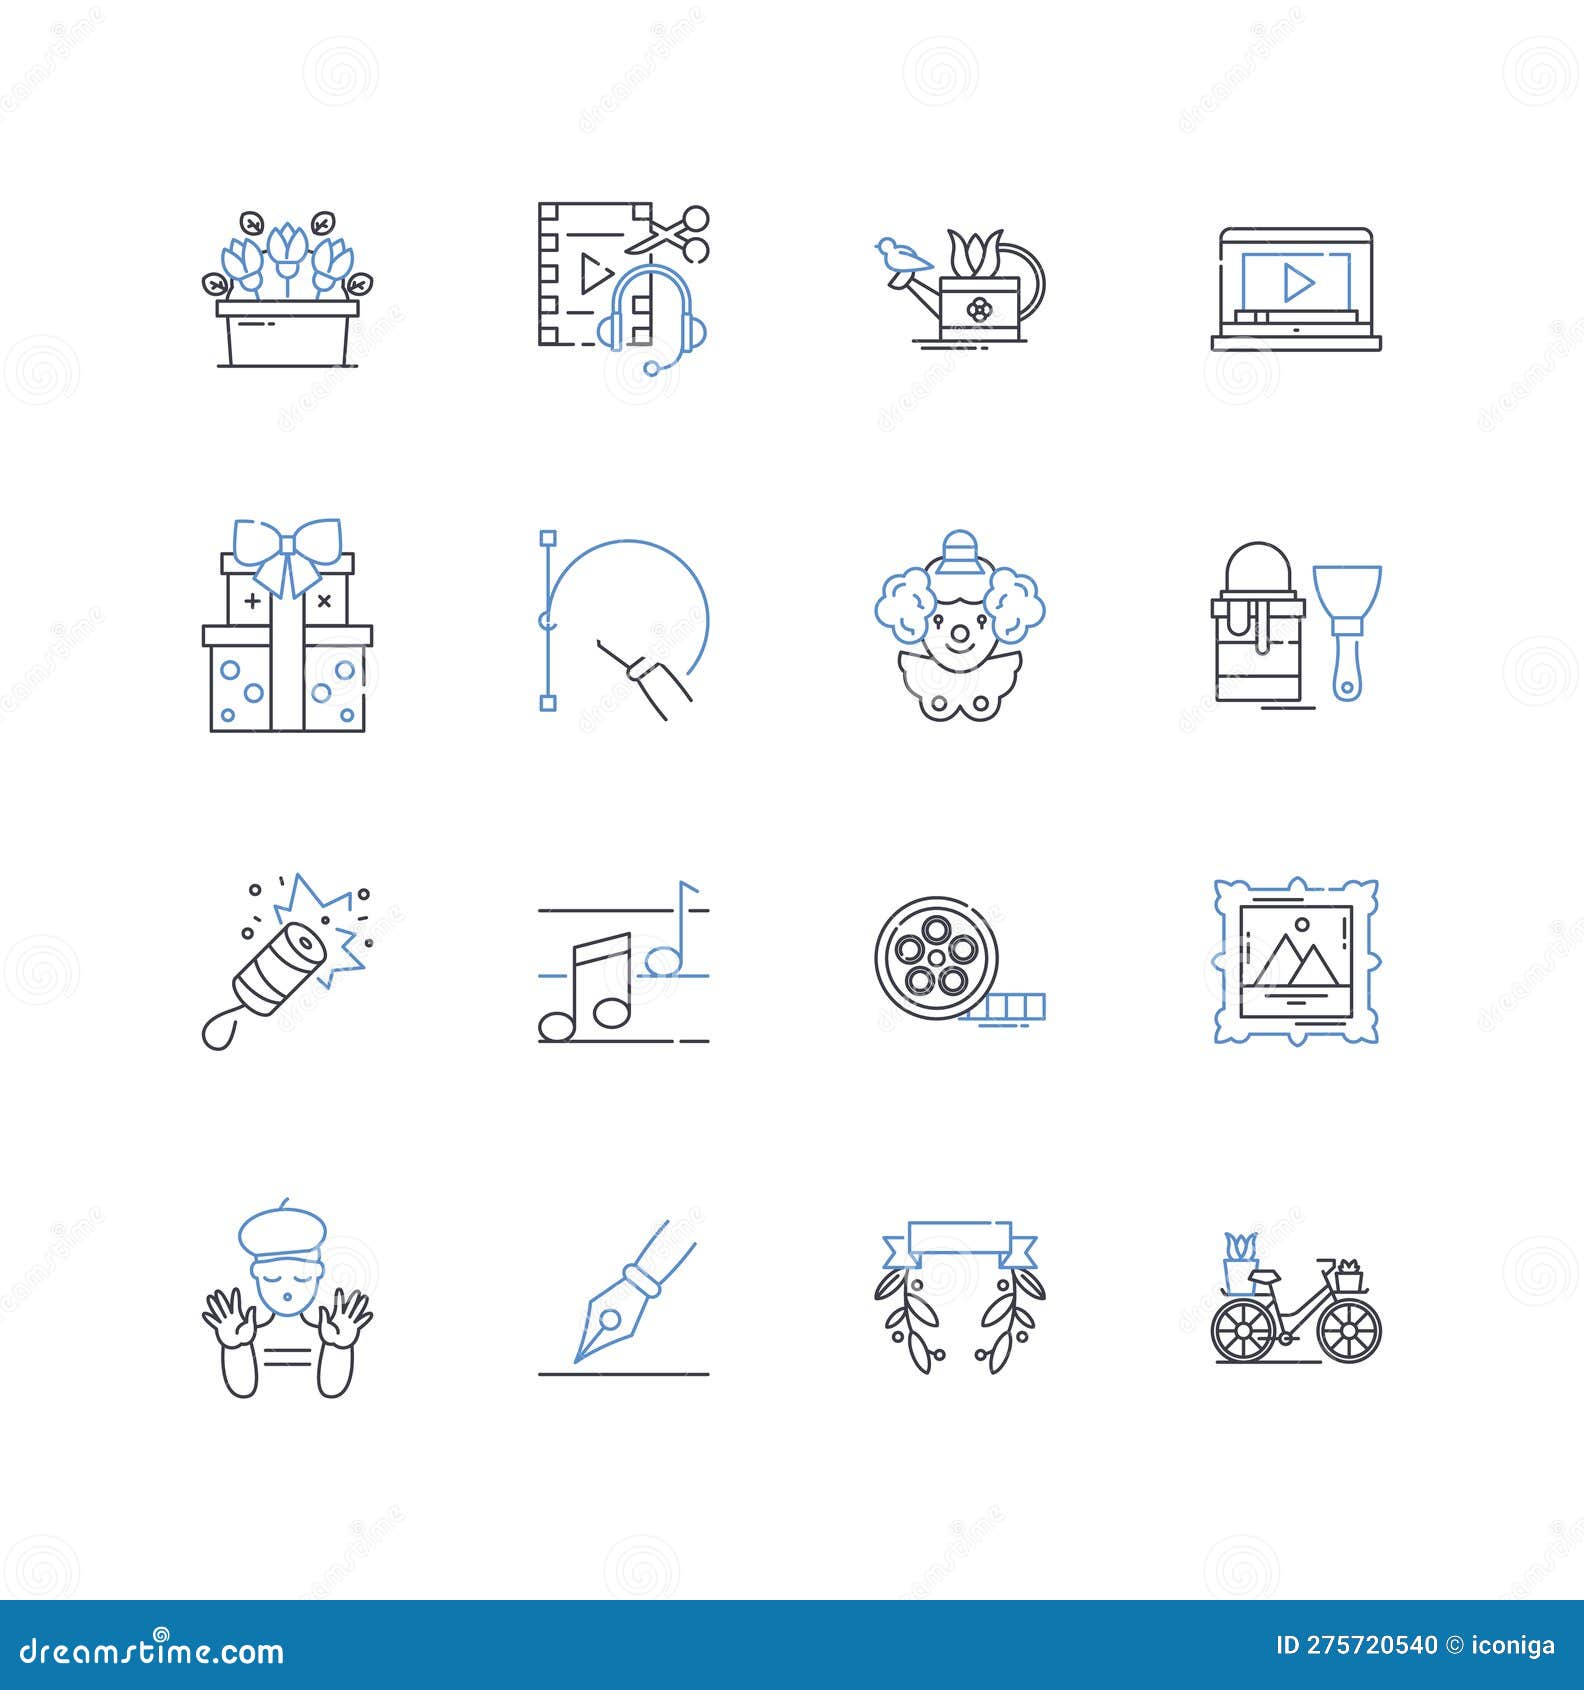 new age jobs line icons collection. gig, remote, freelance, virtual, digital, tech, creative  and linear